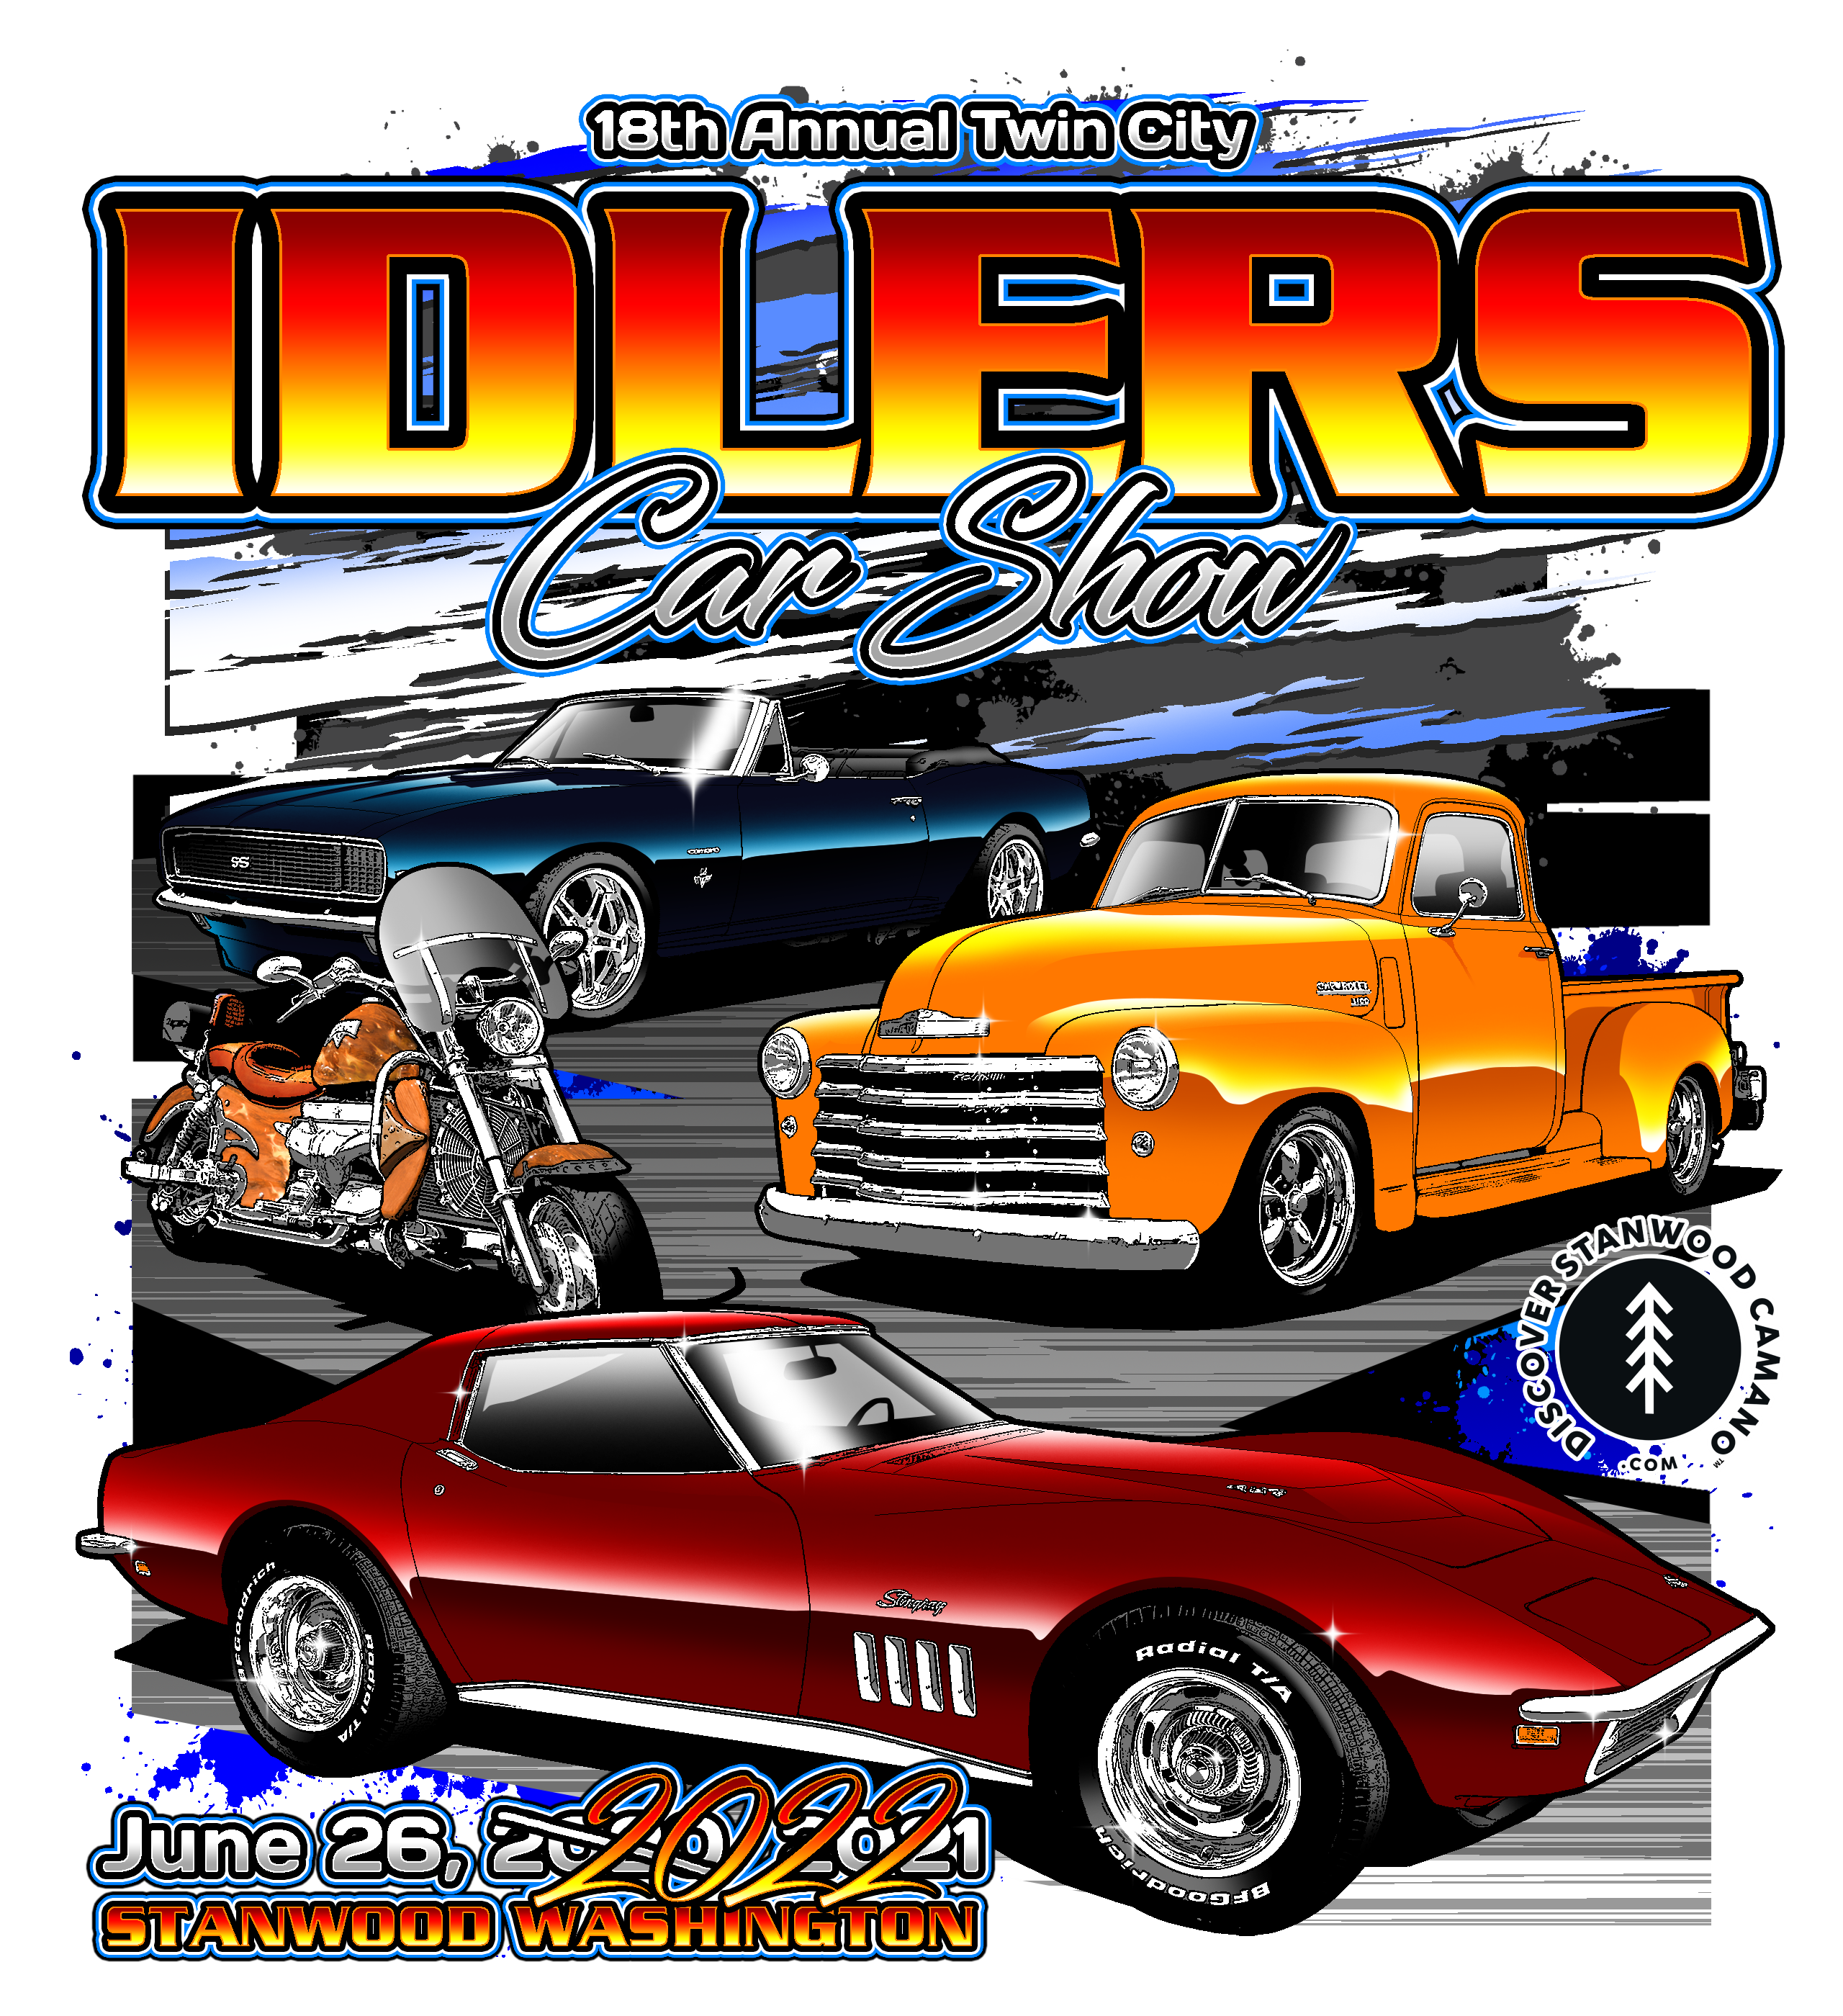 Twin City Idlers Car Show 2022 Discover Stanwood Camano